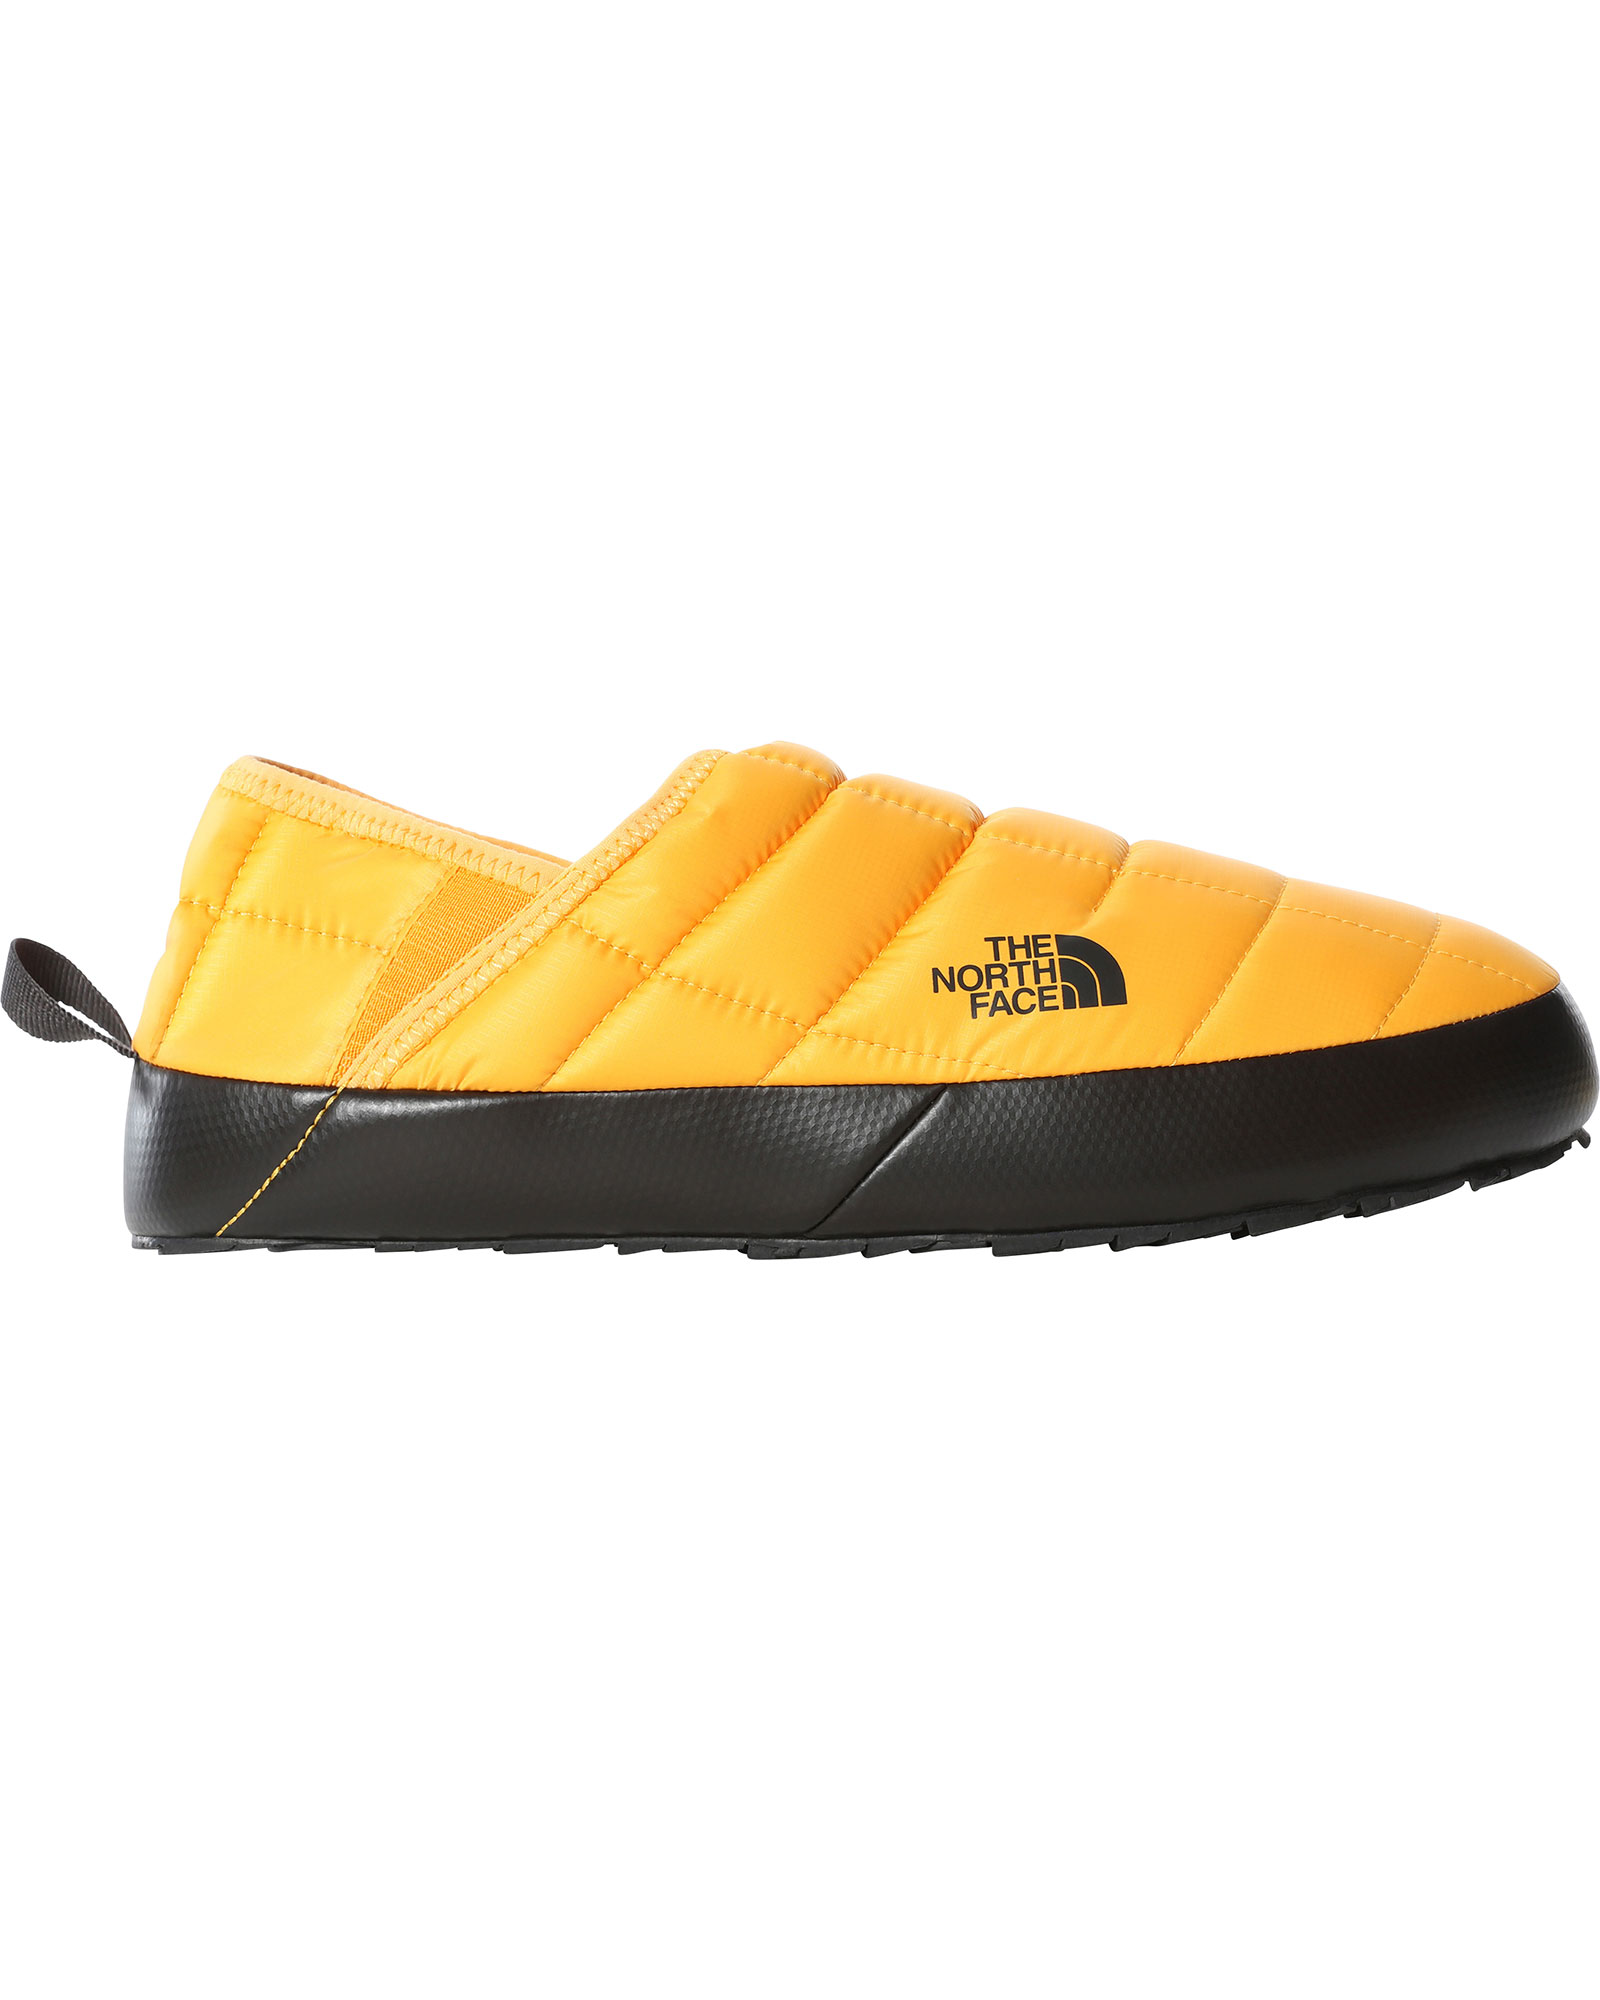 The North Face Men’s ThermoBall V Traction Mules - Summit Gold/TNF Black UK 11